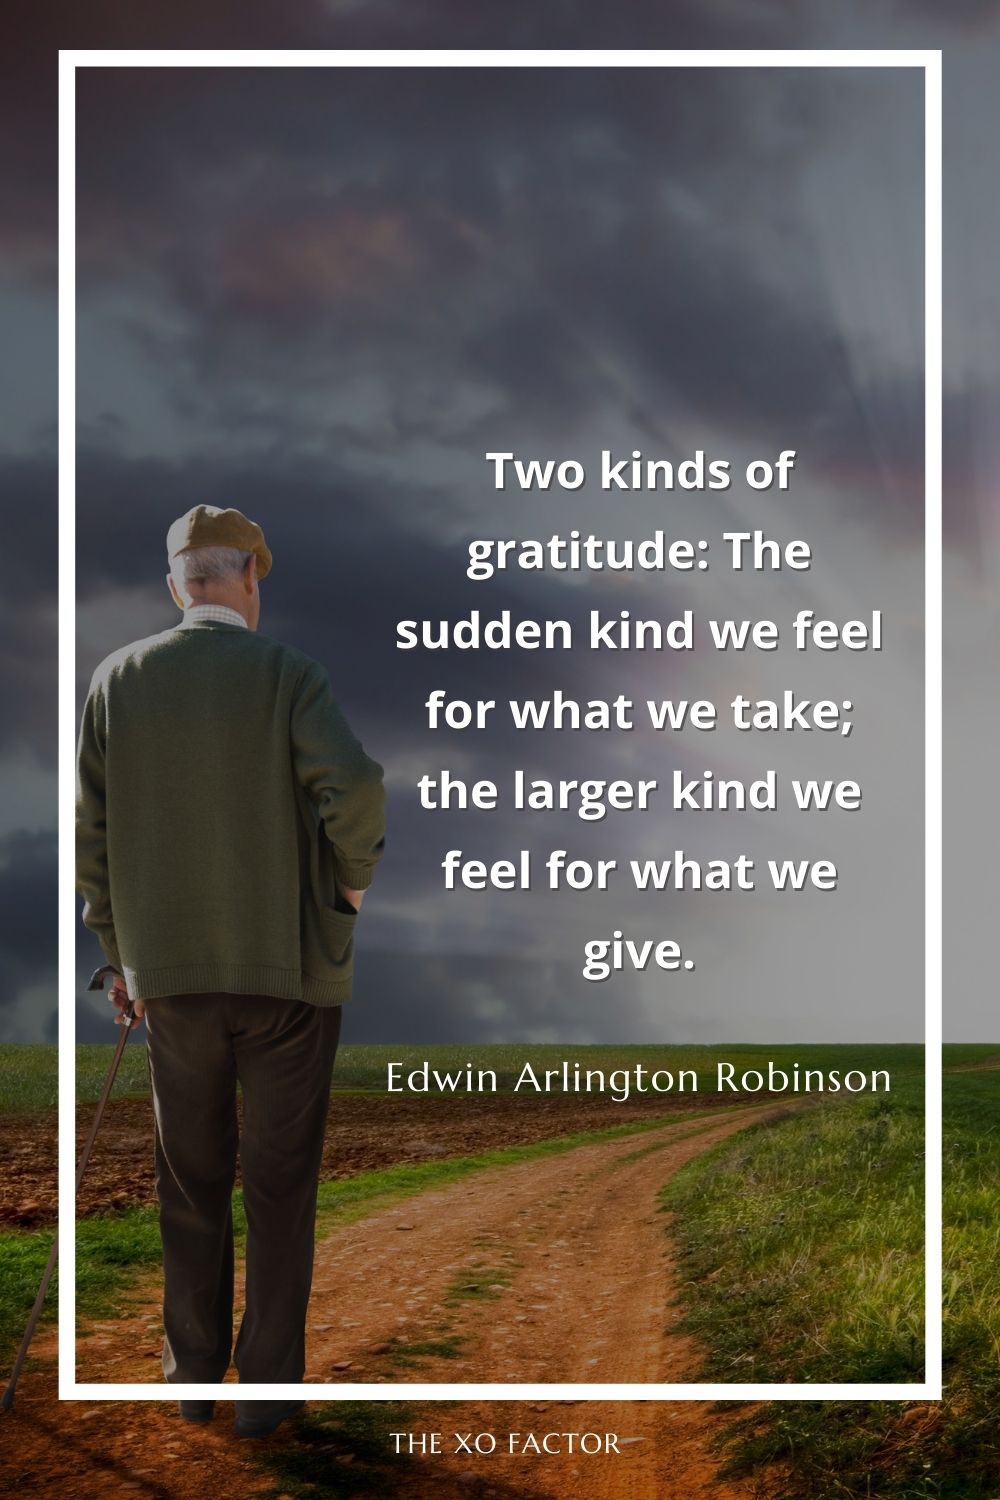 Two kinds of gratitude: The sudden kind we feel for what we take; the larger kind we feel for what we give.